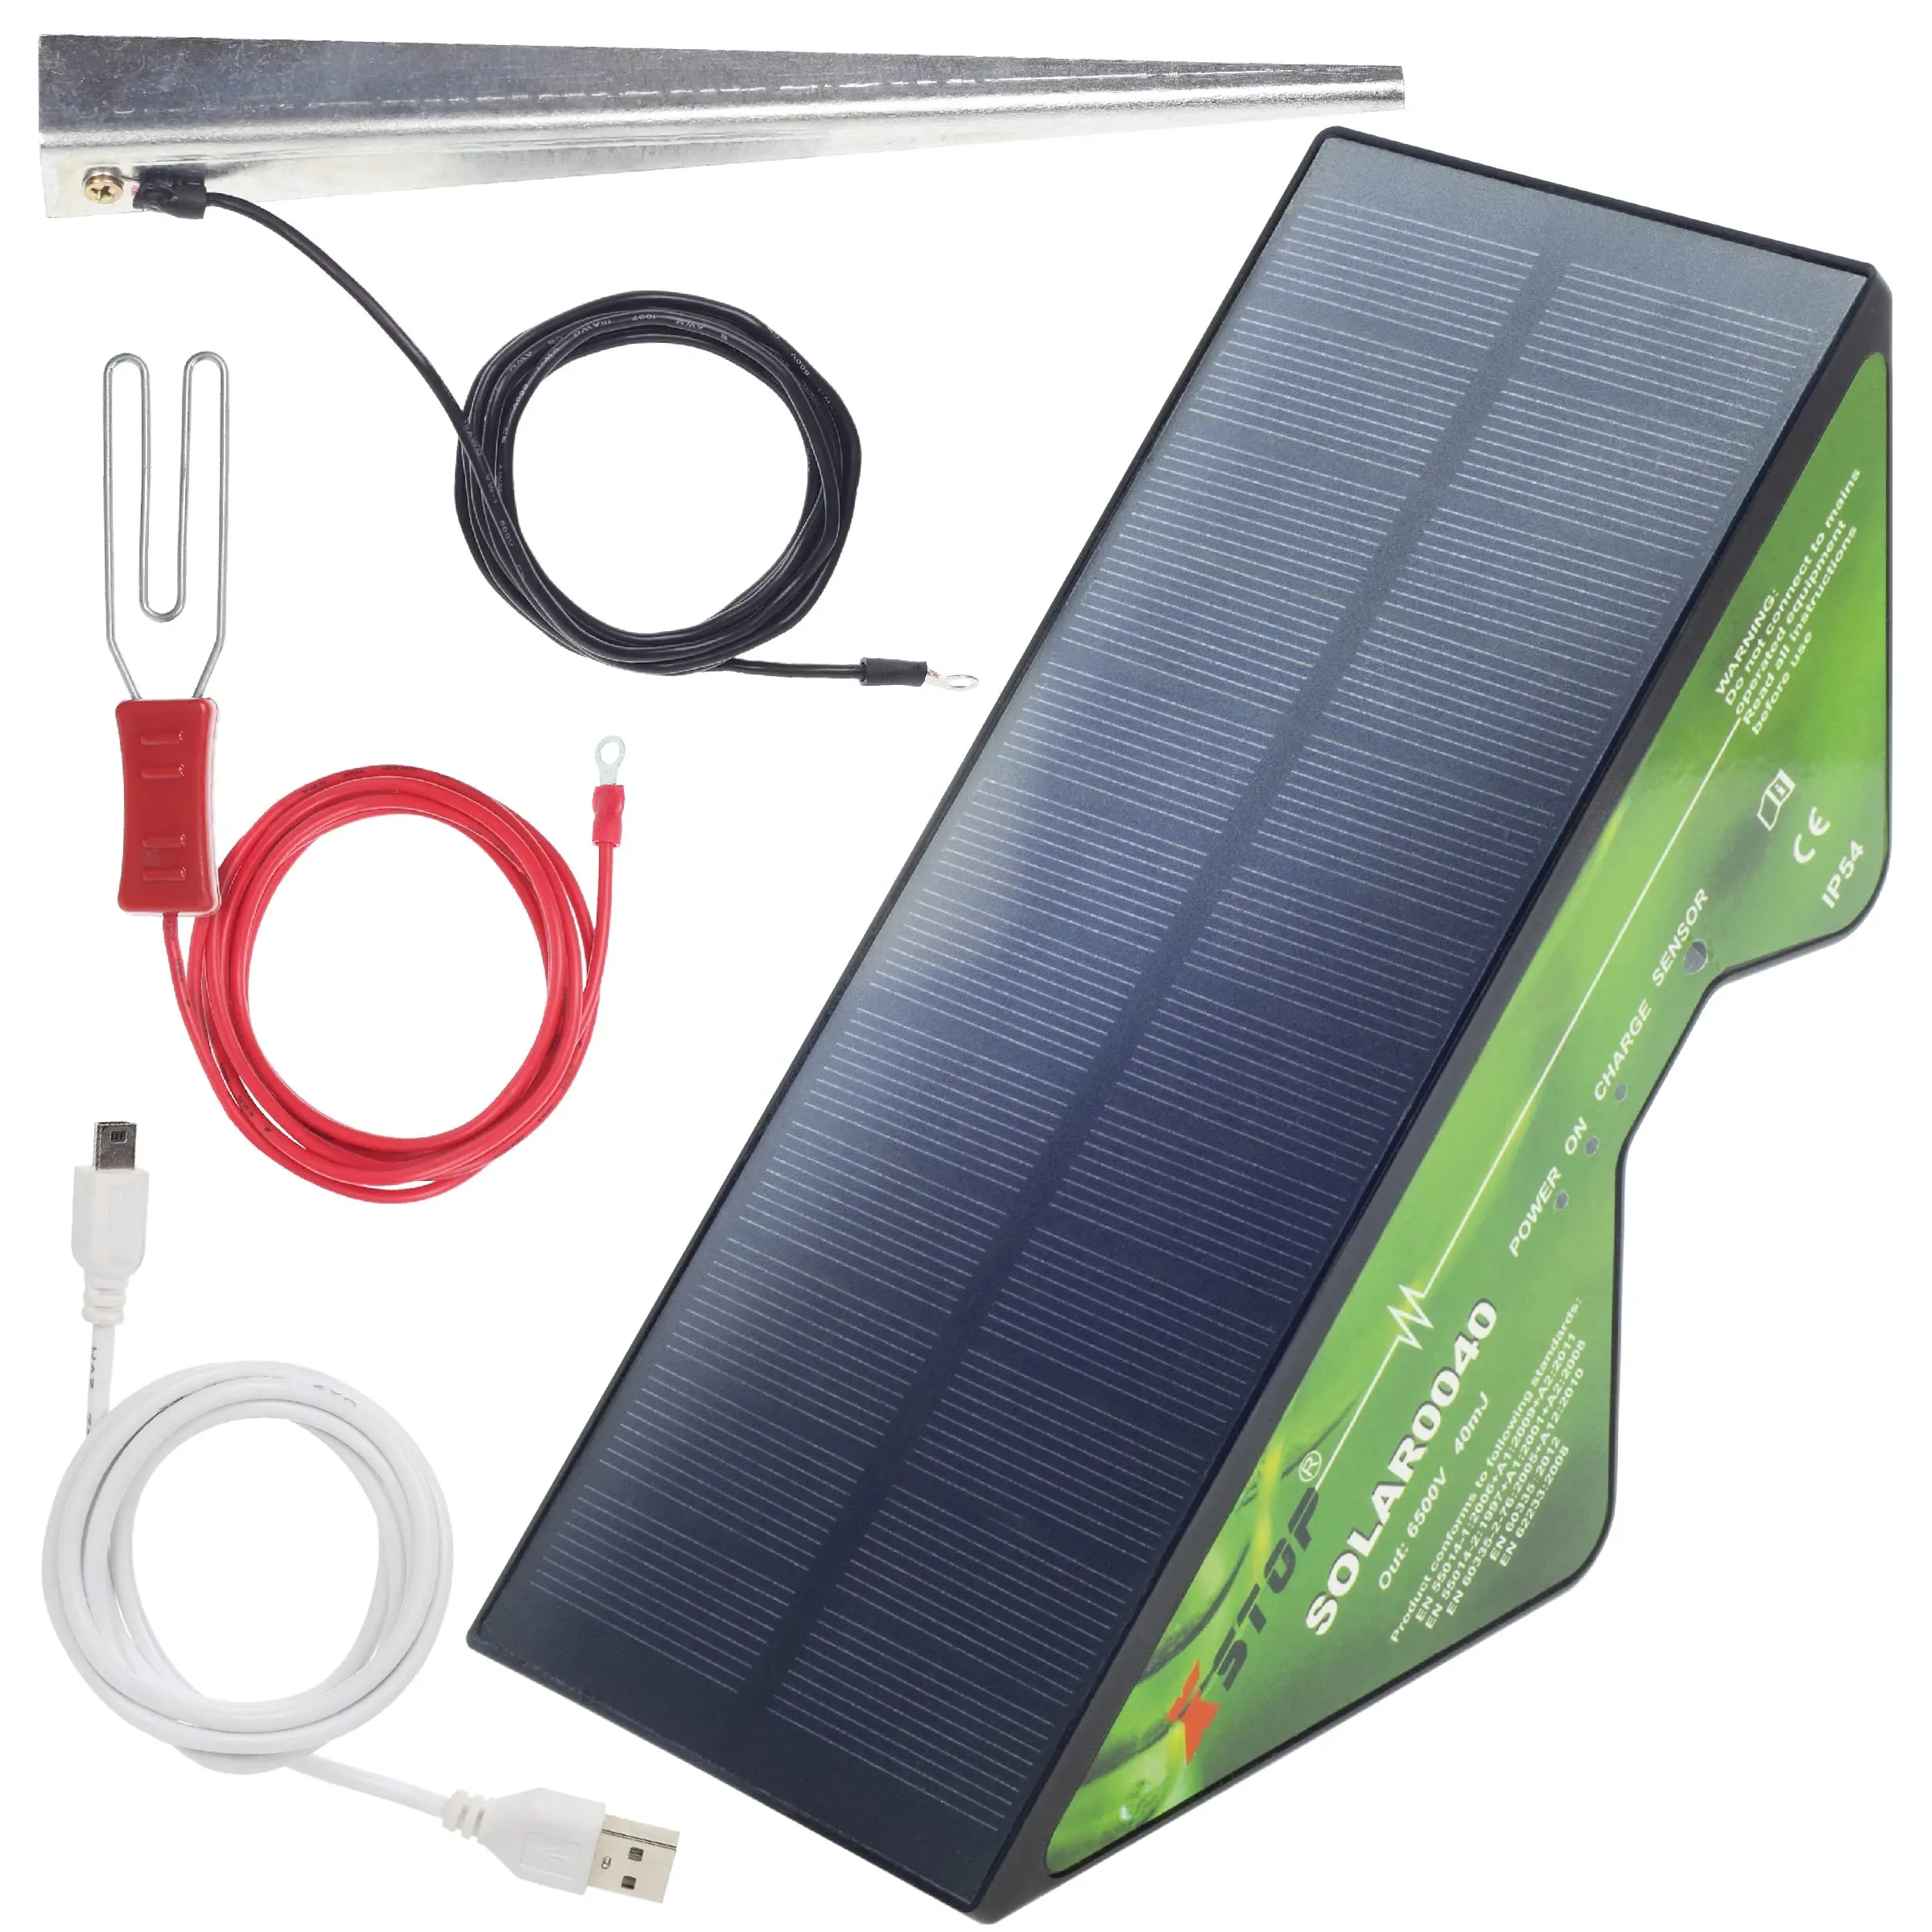 Solar Powered Electric Fence Energizer X-Stop2 Km Range Full Kit Includes Earth Stake and All Leads Plus USB Charge Cable